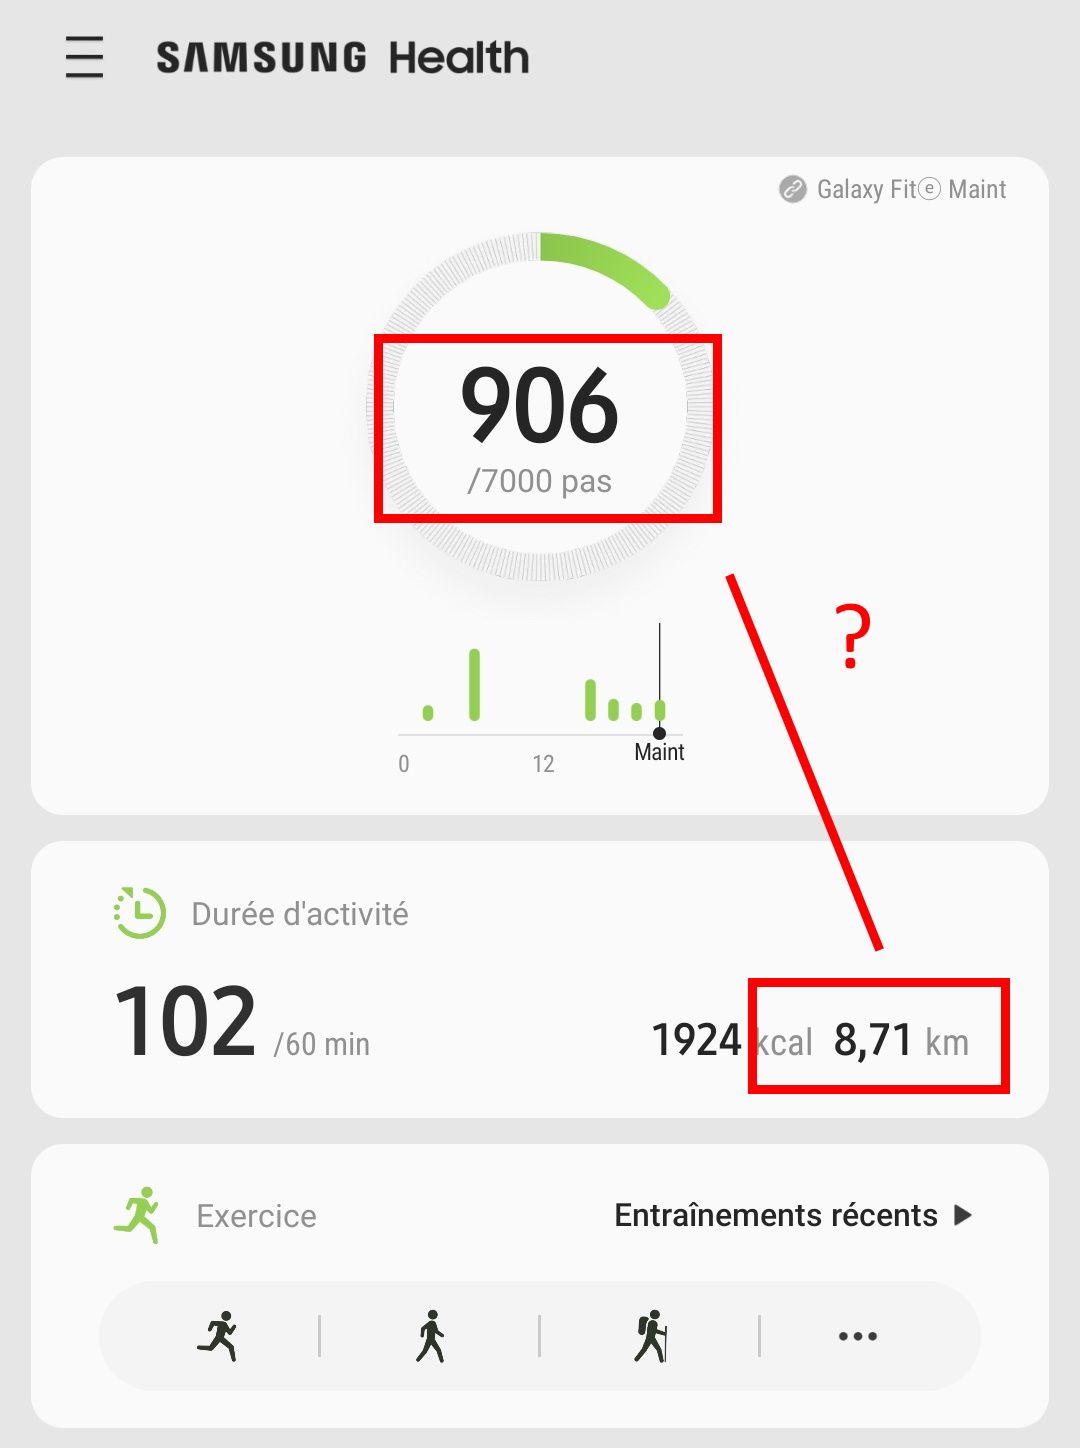 S health app not counting steps on phone - Samsung Community